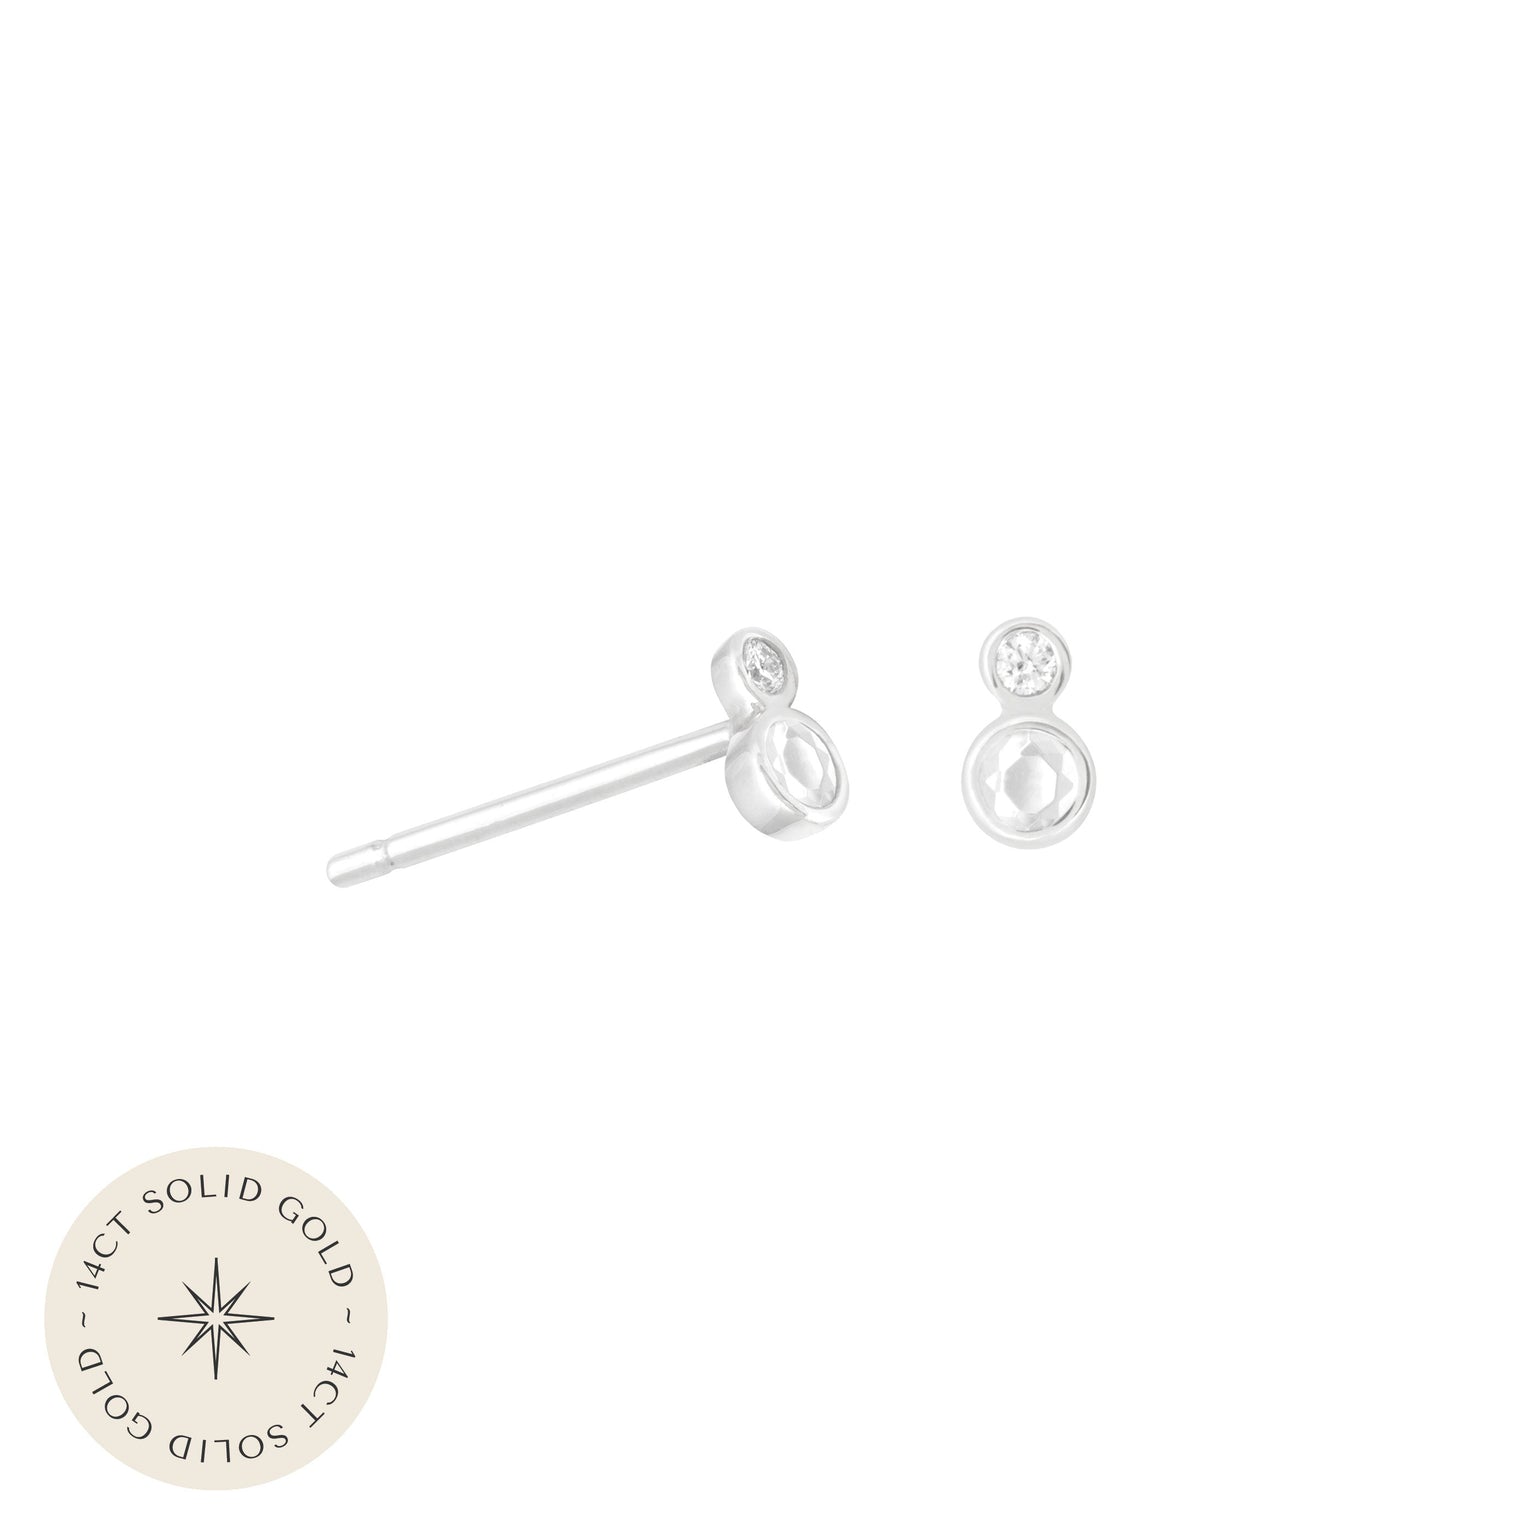 Double Topaz Stud Earrings in Solid White Gold with 14CT solid gold label